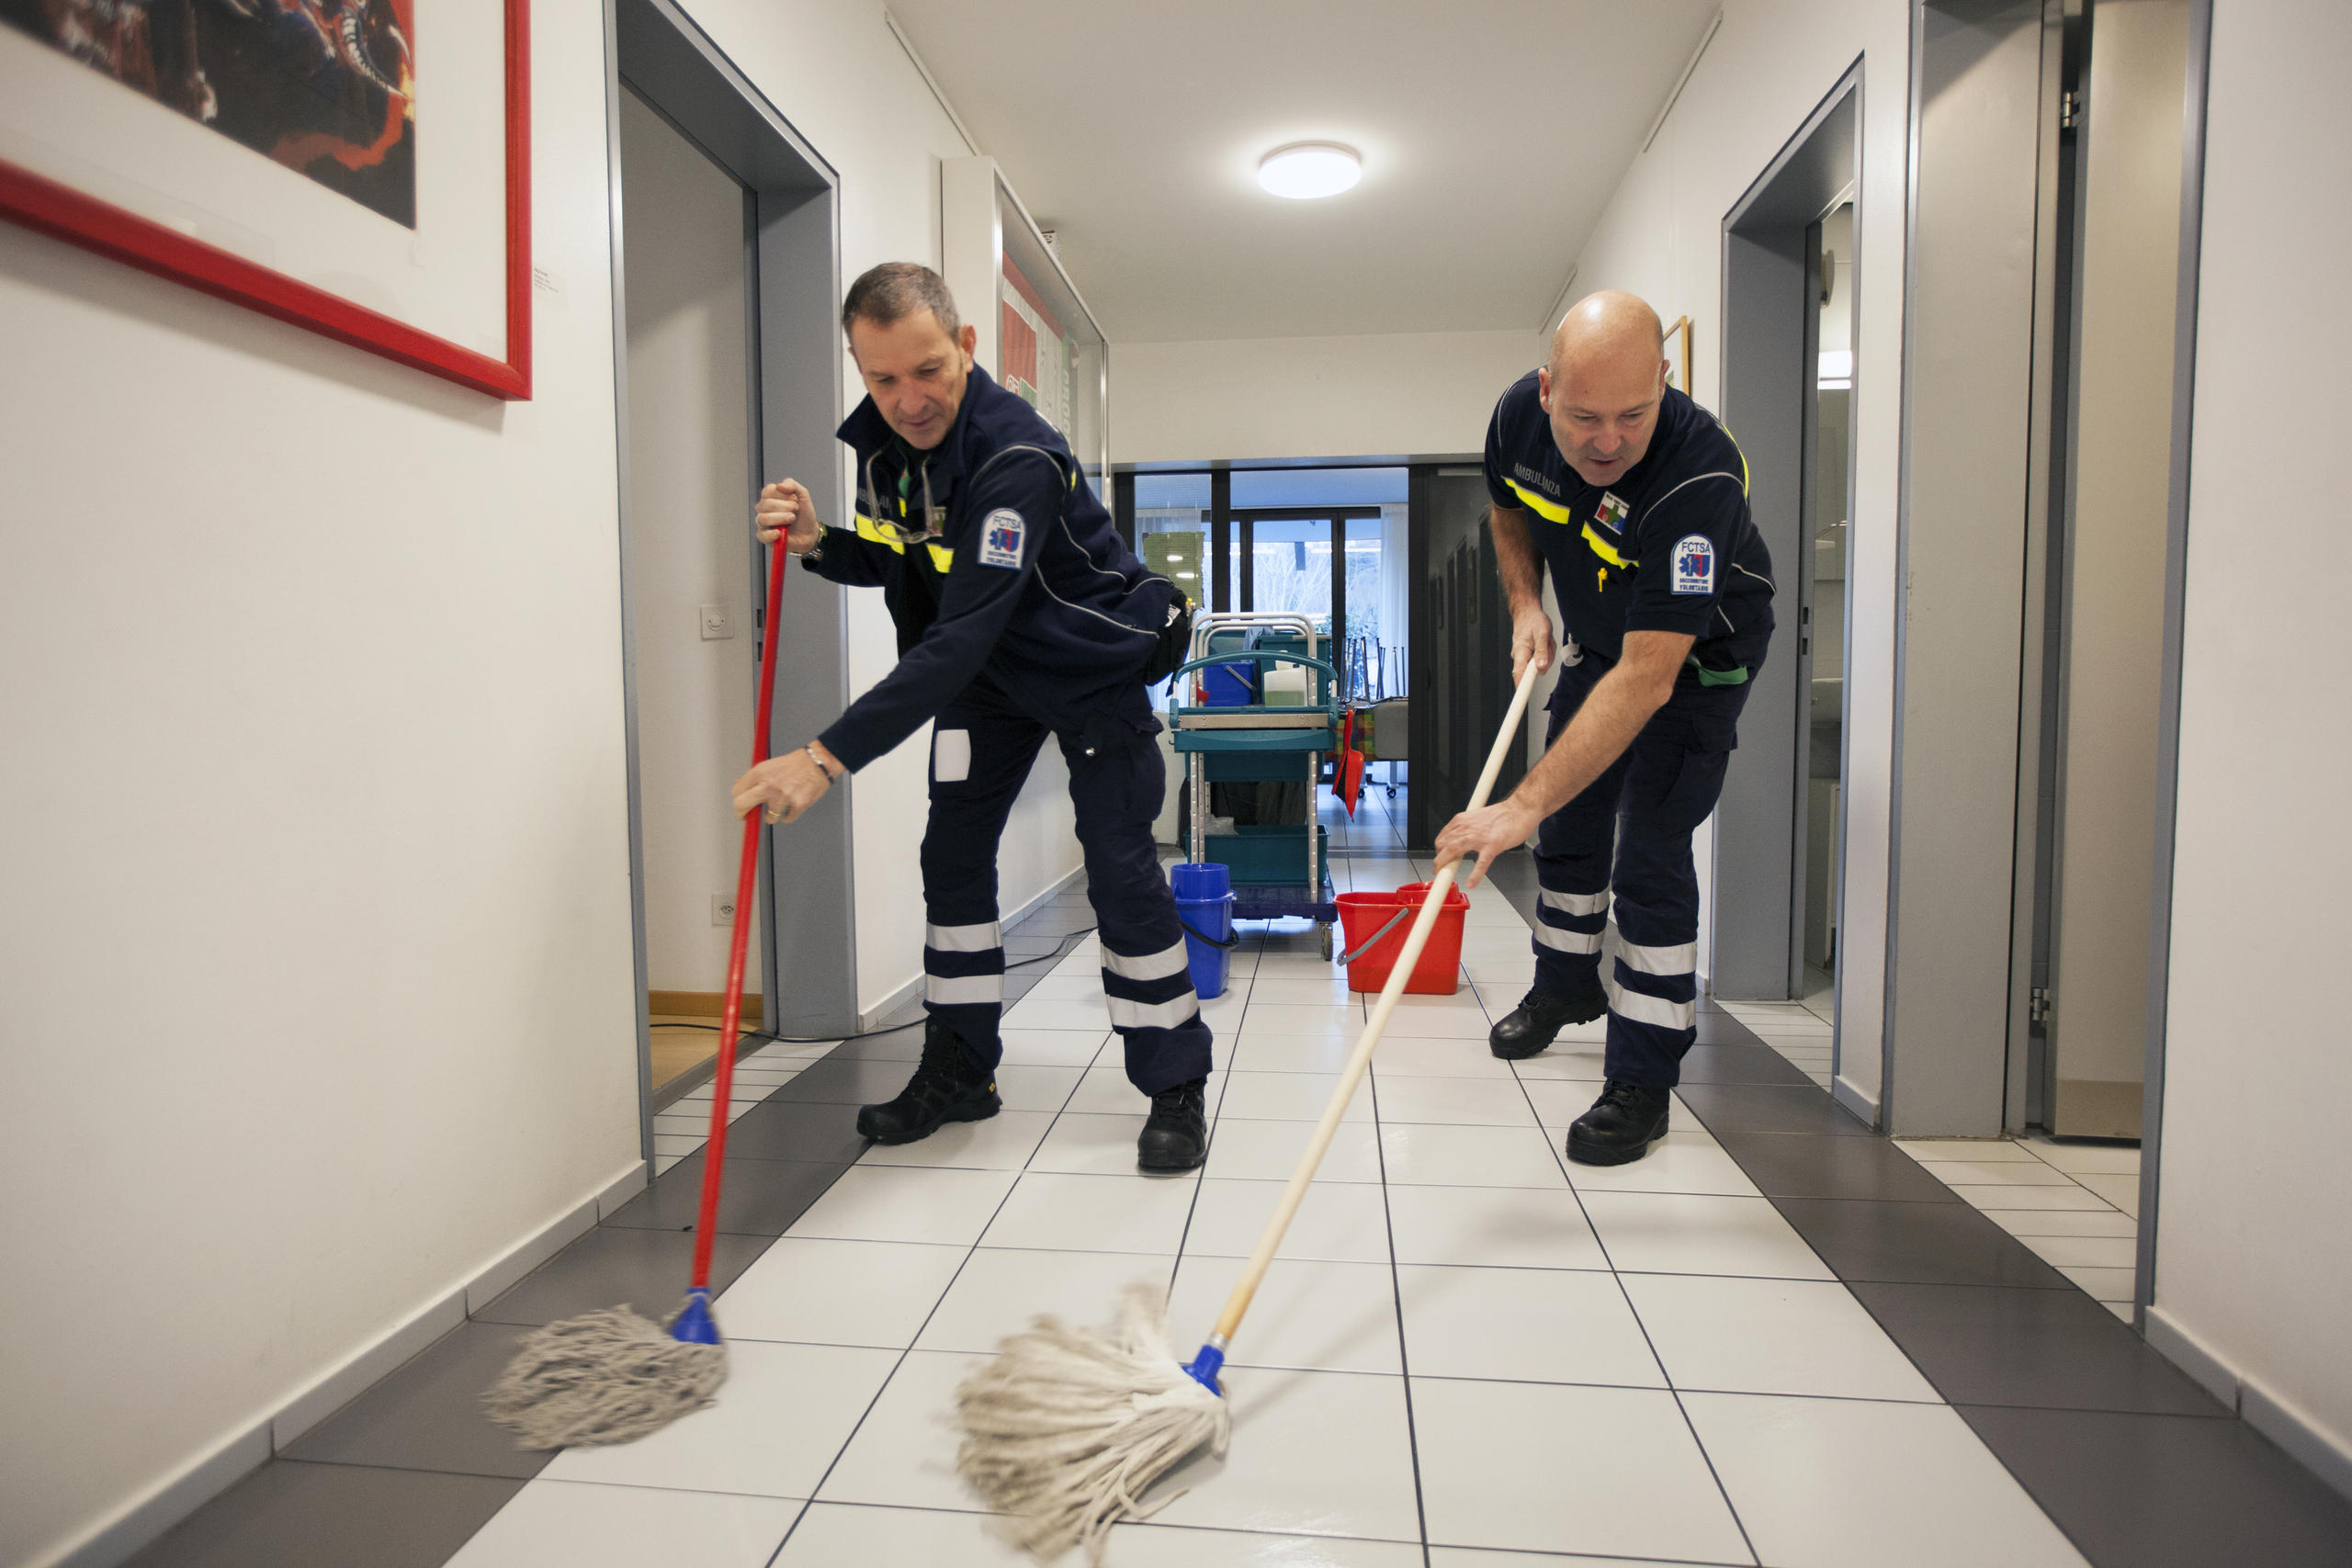 Mopping the floor at the base station